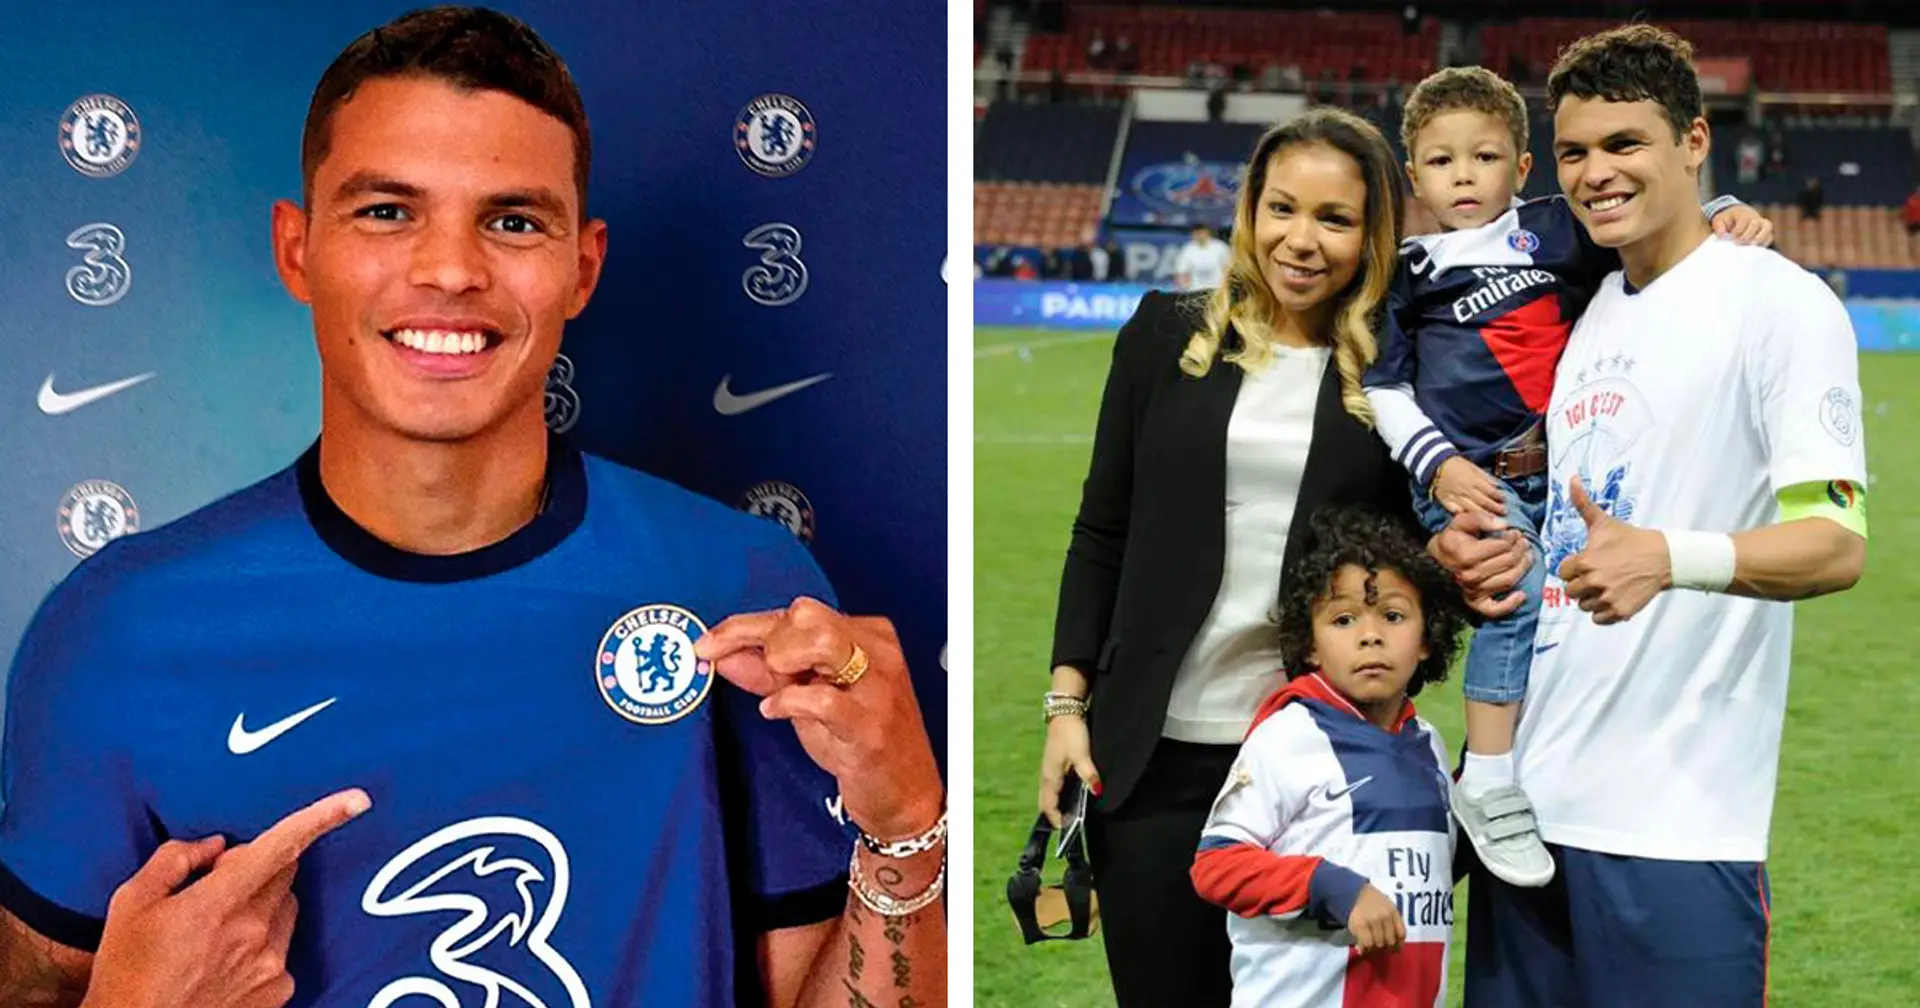 'Dad, why don’t you play for Chelsea?': Thiago Silva's wife reveals touching coincidence after centre-back's Stamford Bridge move